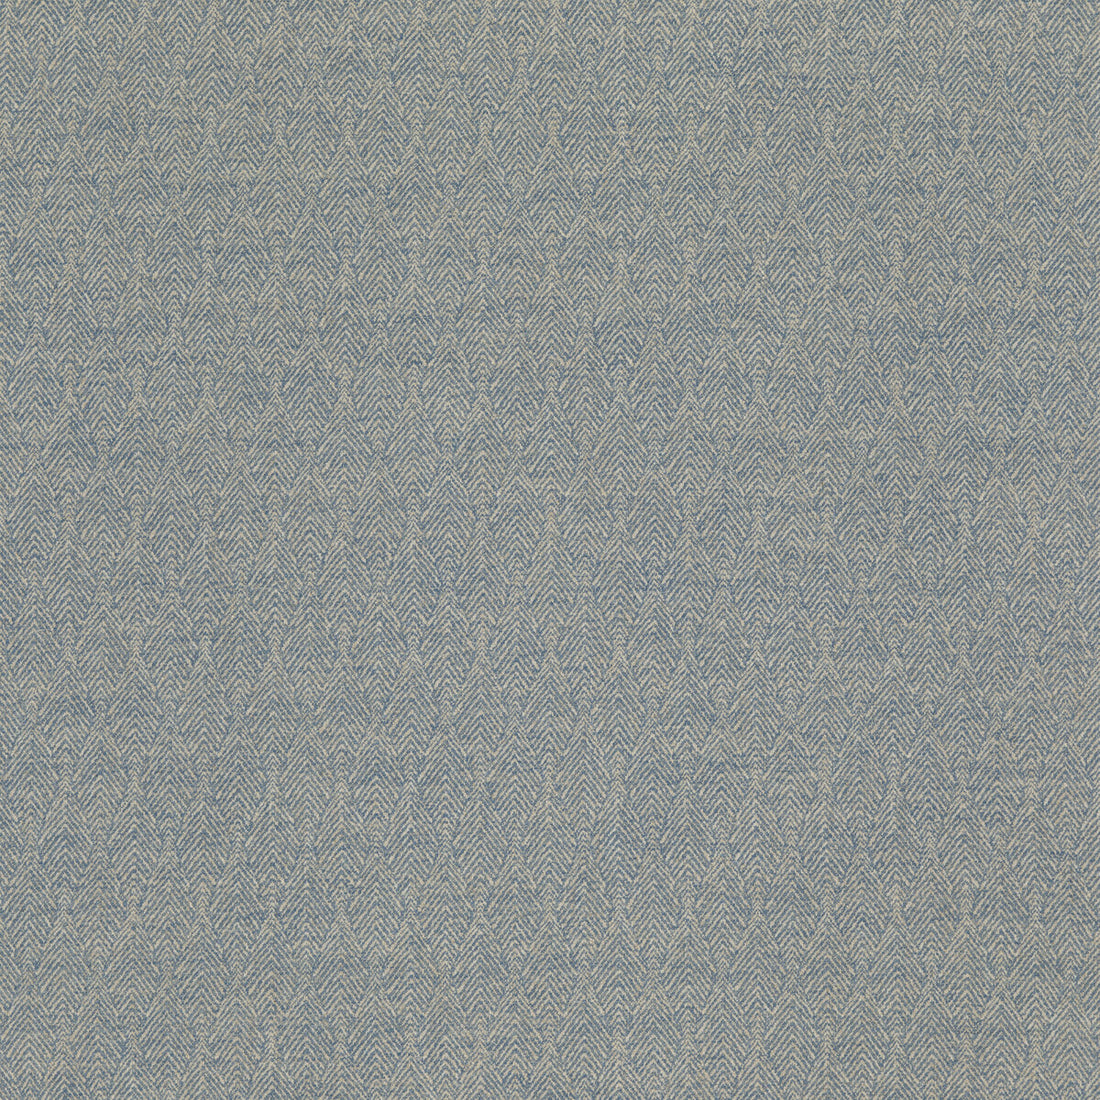 Capo fabric in soft teal color - pattern ED85298.615.0 - by Threads in the Luxury Weaves collection